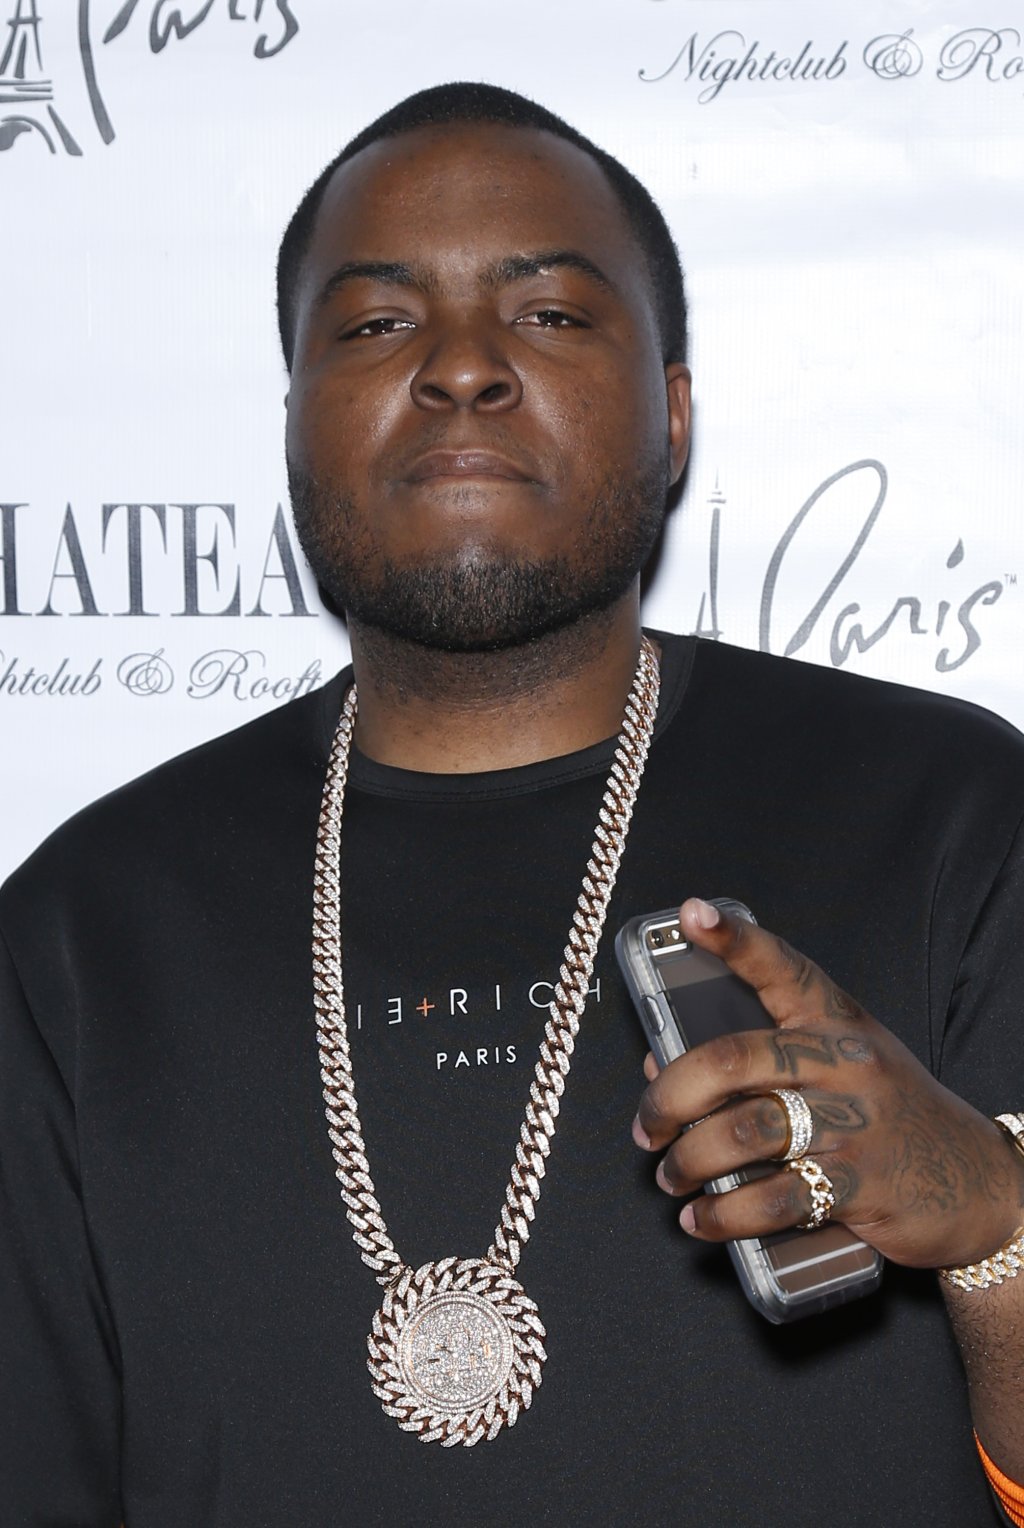 Sean Kingston at Chateau Nightclub and Rooftop